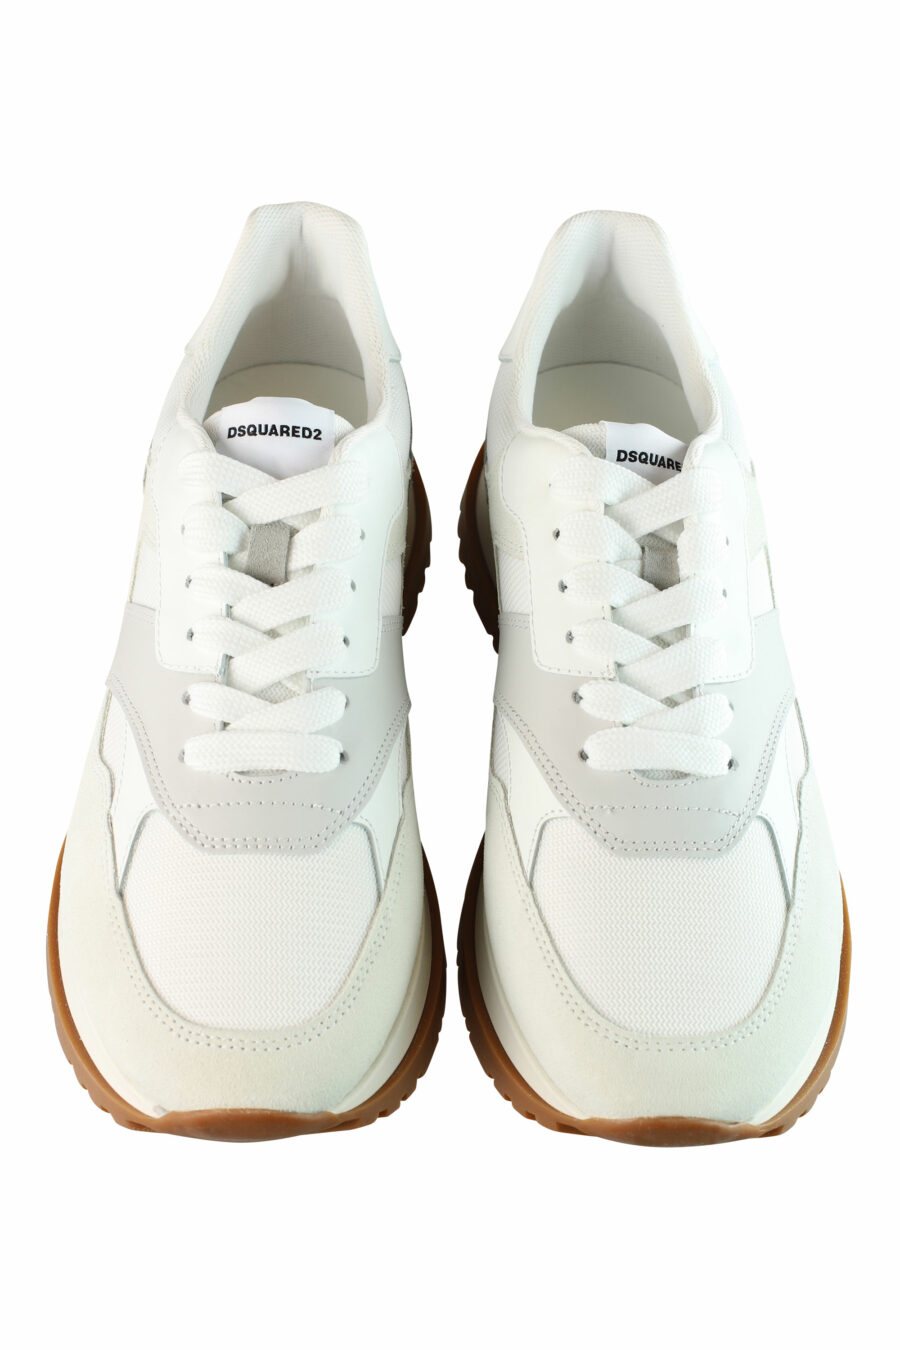 White running shoes with grey and beige details - IMG 1364